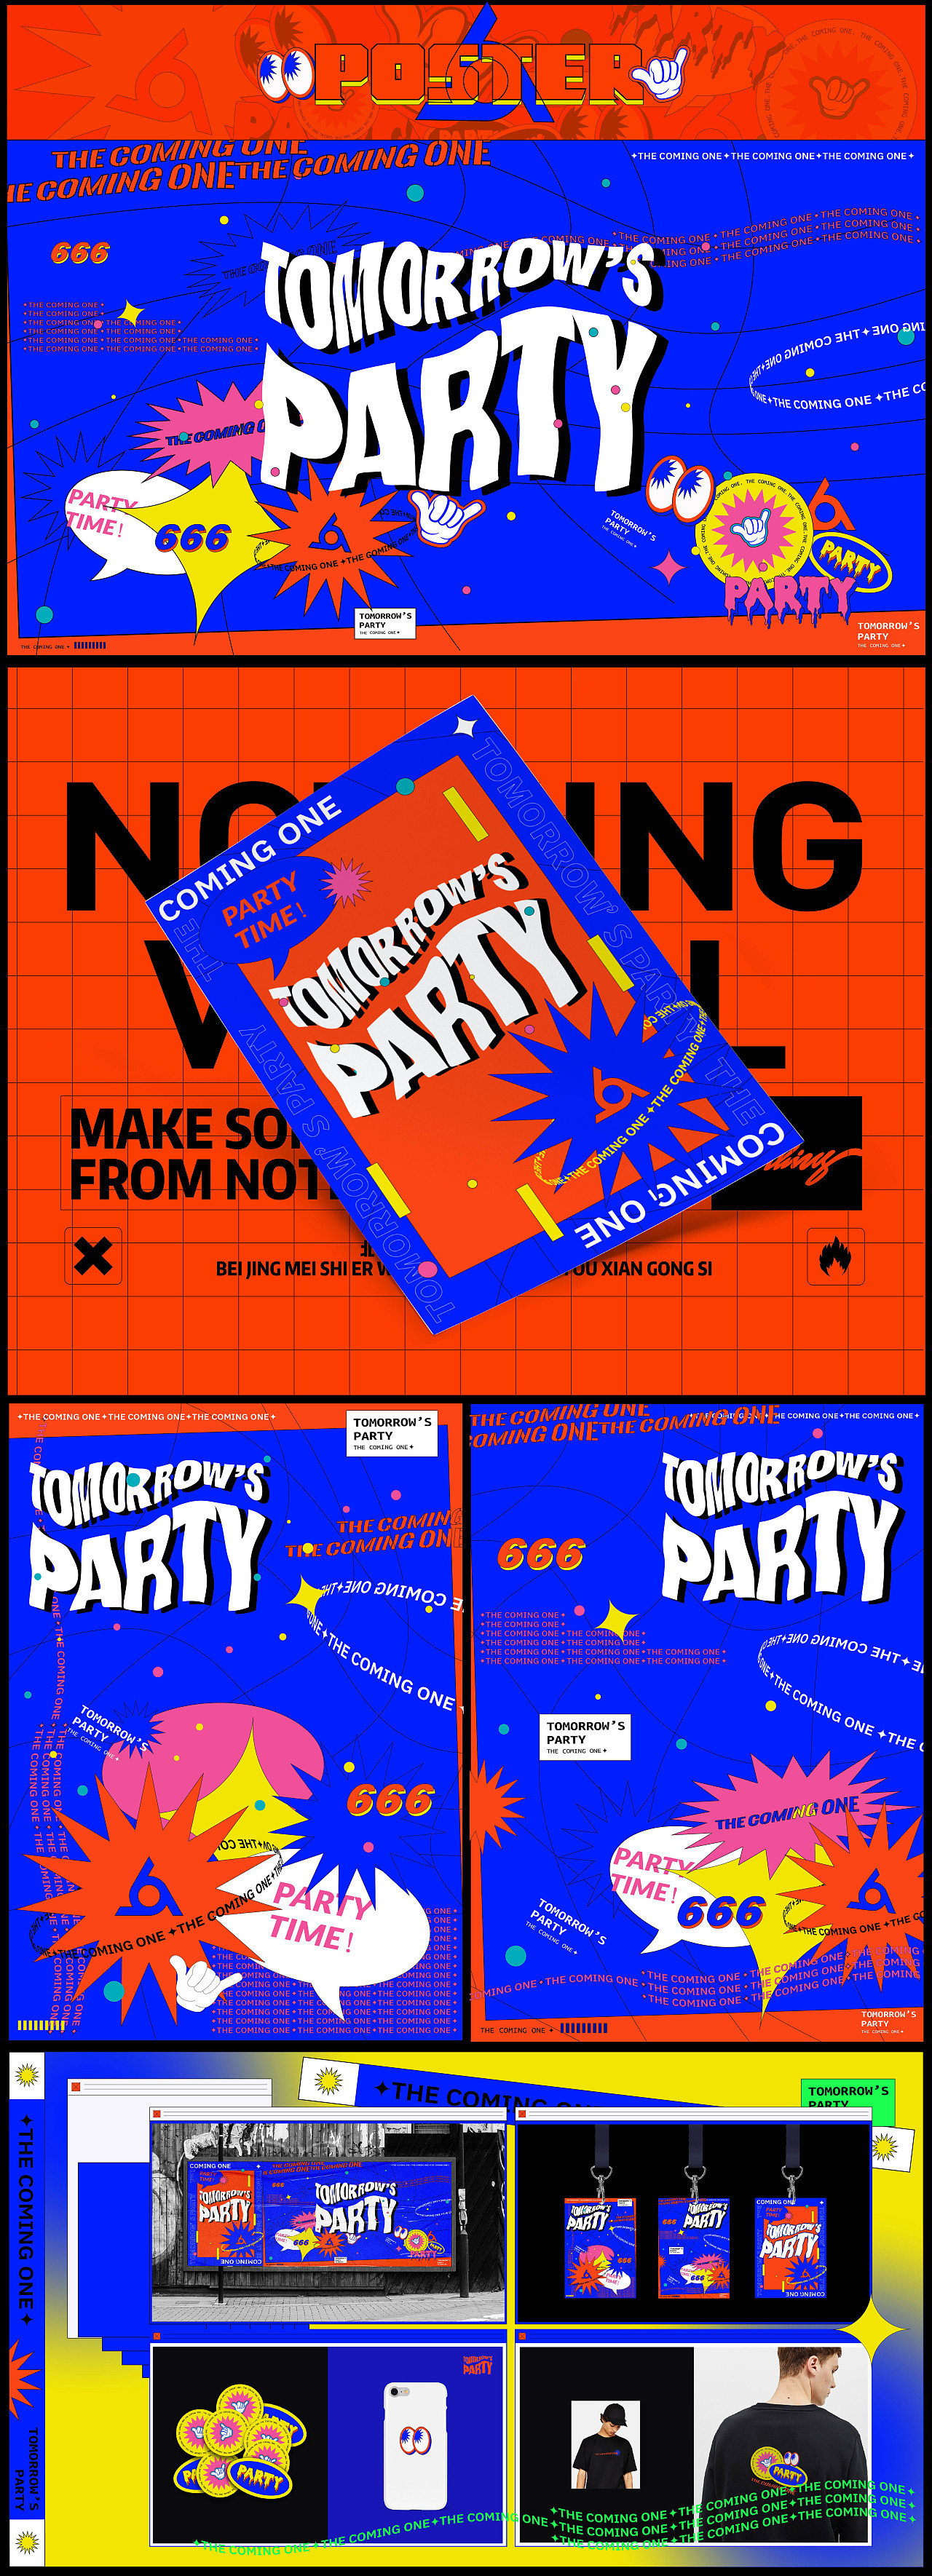 [Nothing]Tomorrow&#39;s party视觉规划